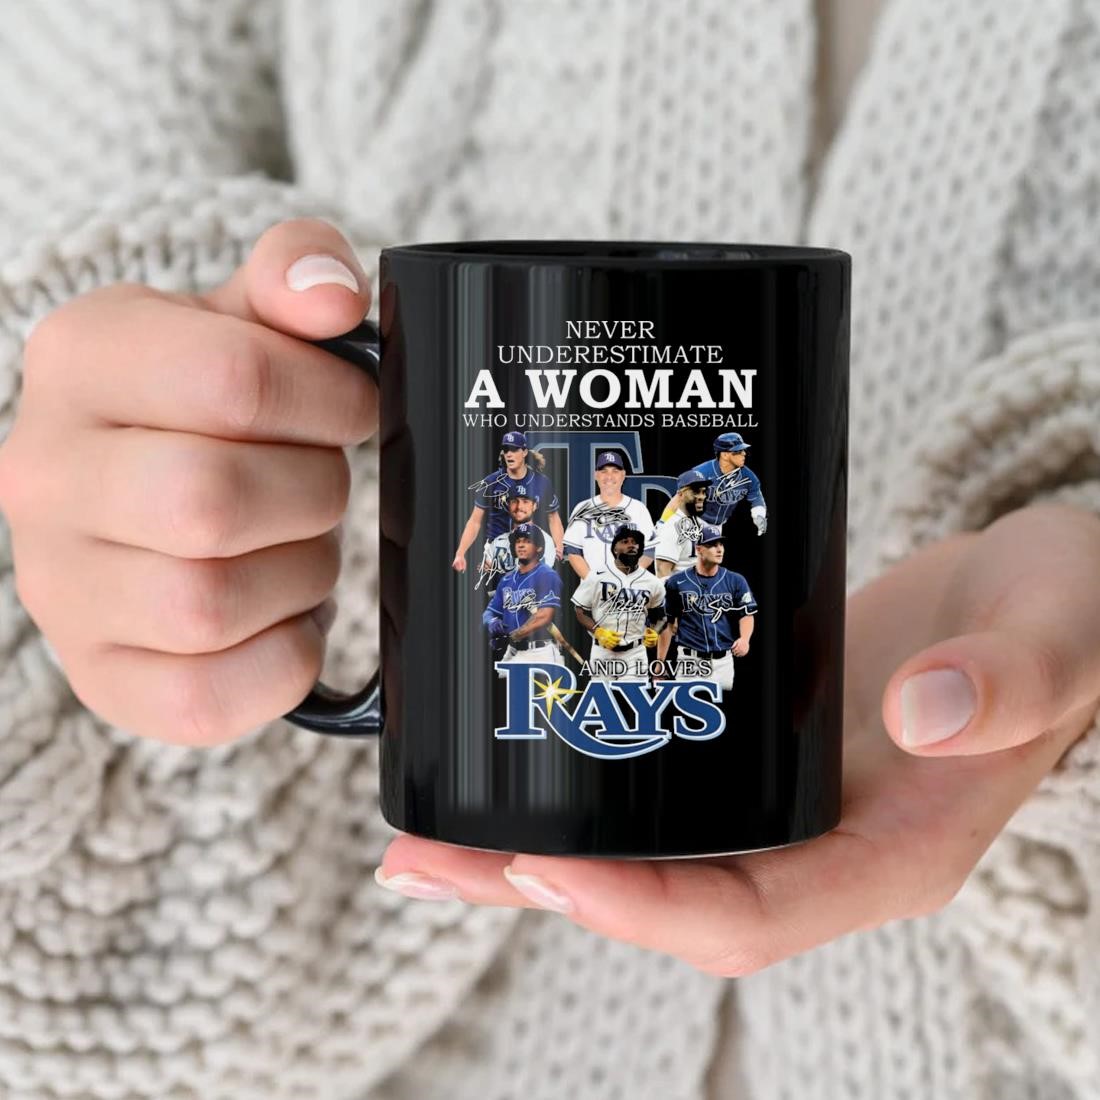 Tampa Bay Rays baseball team - Never underestimate a woman who